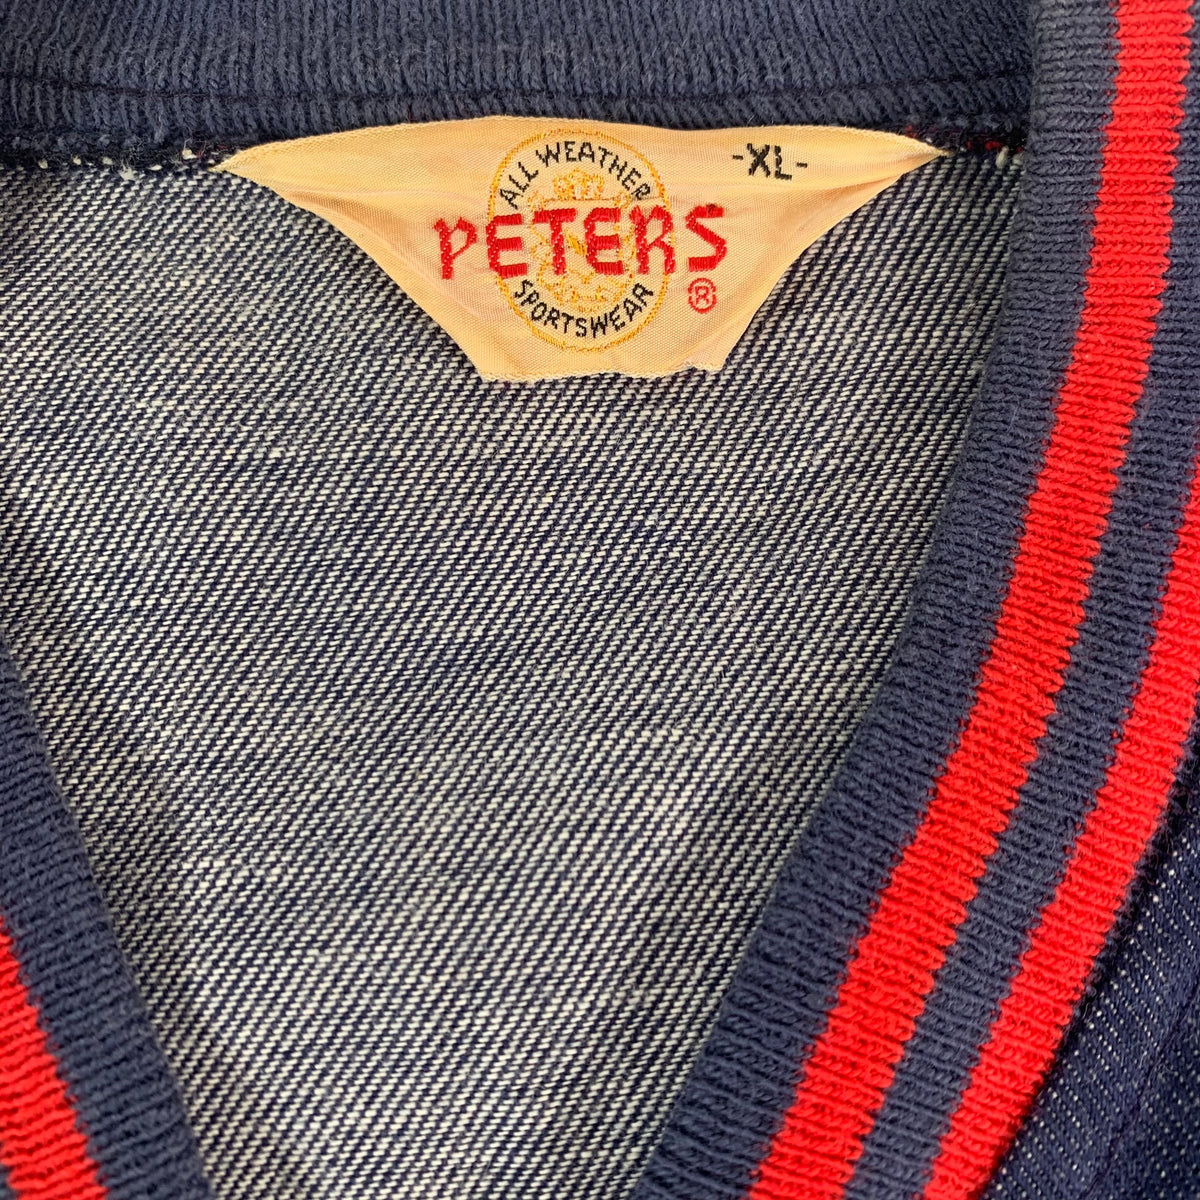 Vintage Peters All Weather Sportwear &quot;Lucky Charm&quot; Jacket